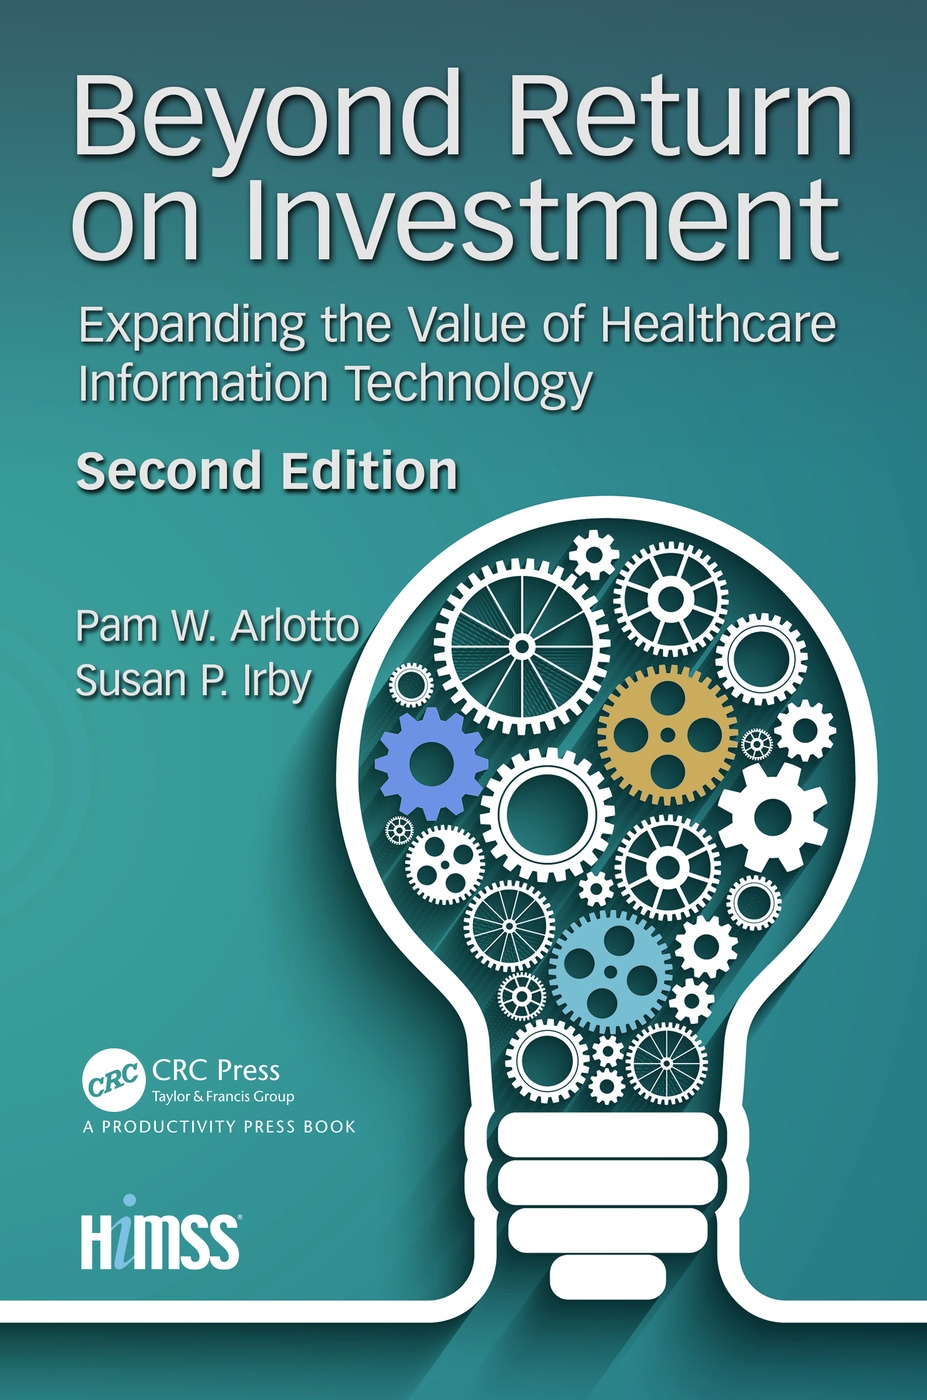 Beyond Return on Investment: Expanding the Value of Healthcare Information Technology